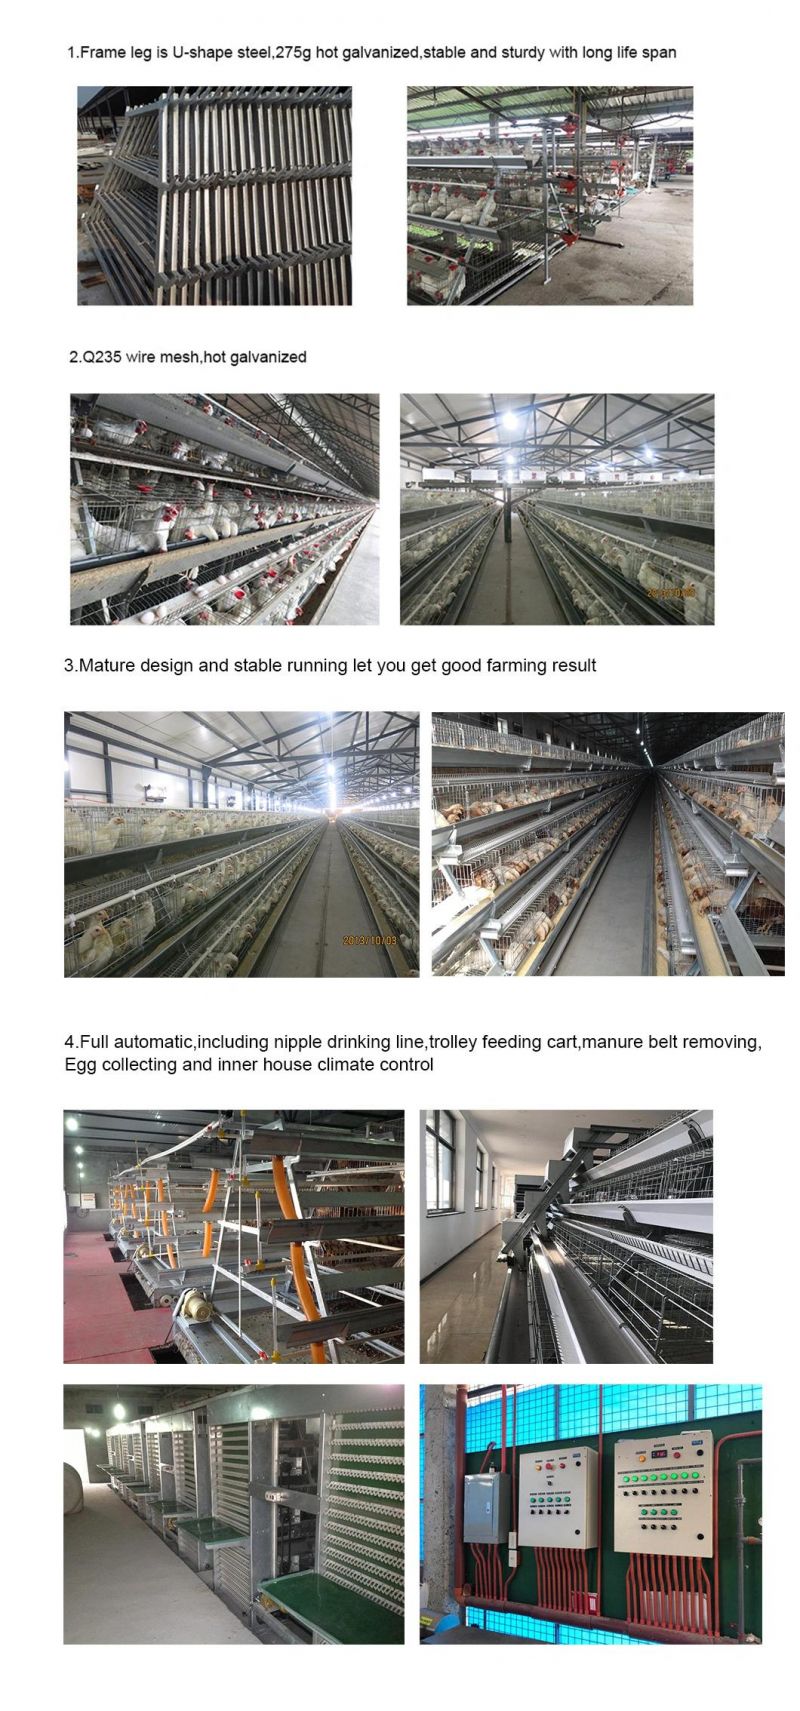 Longfeng Most Advanced Technology Low Egg Broken Rate 15-20years 430cm2 or 450cm2 Poultry Farm Equipment with High Quality